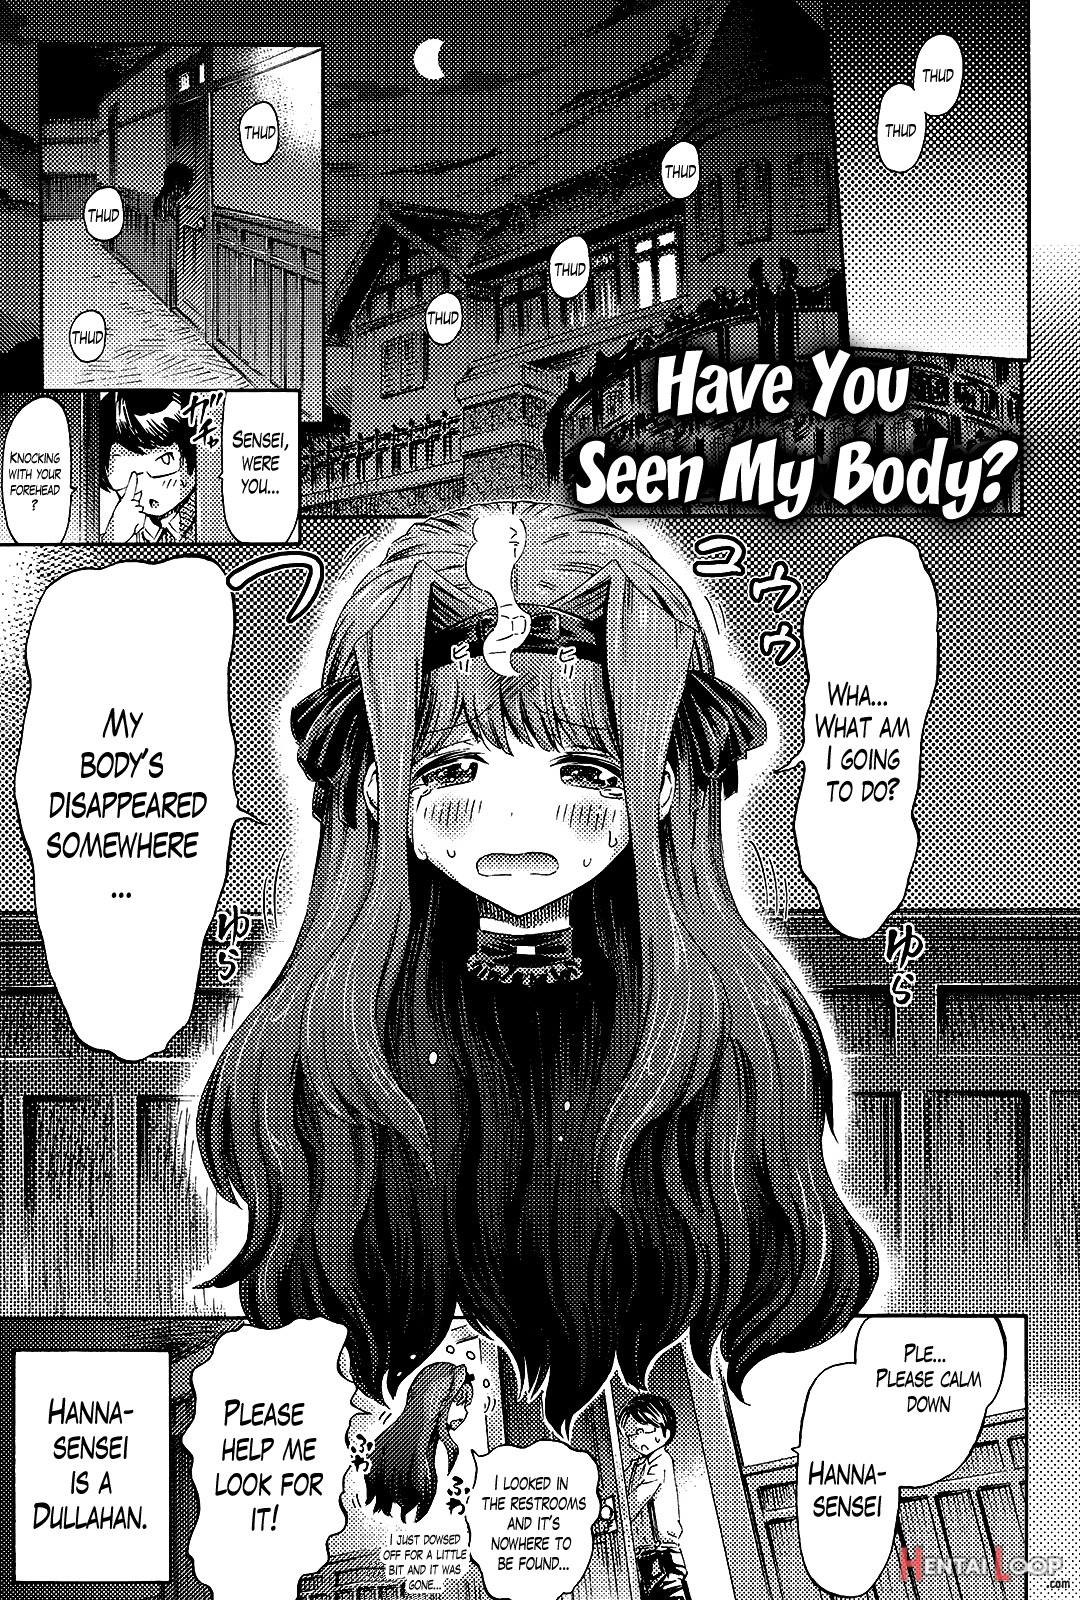 Have You Seen My Body? page 1